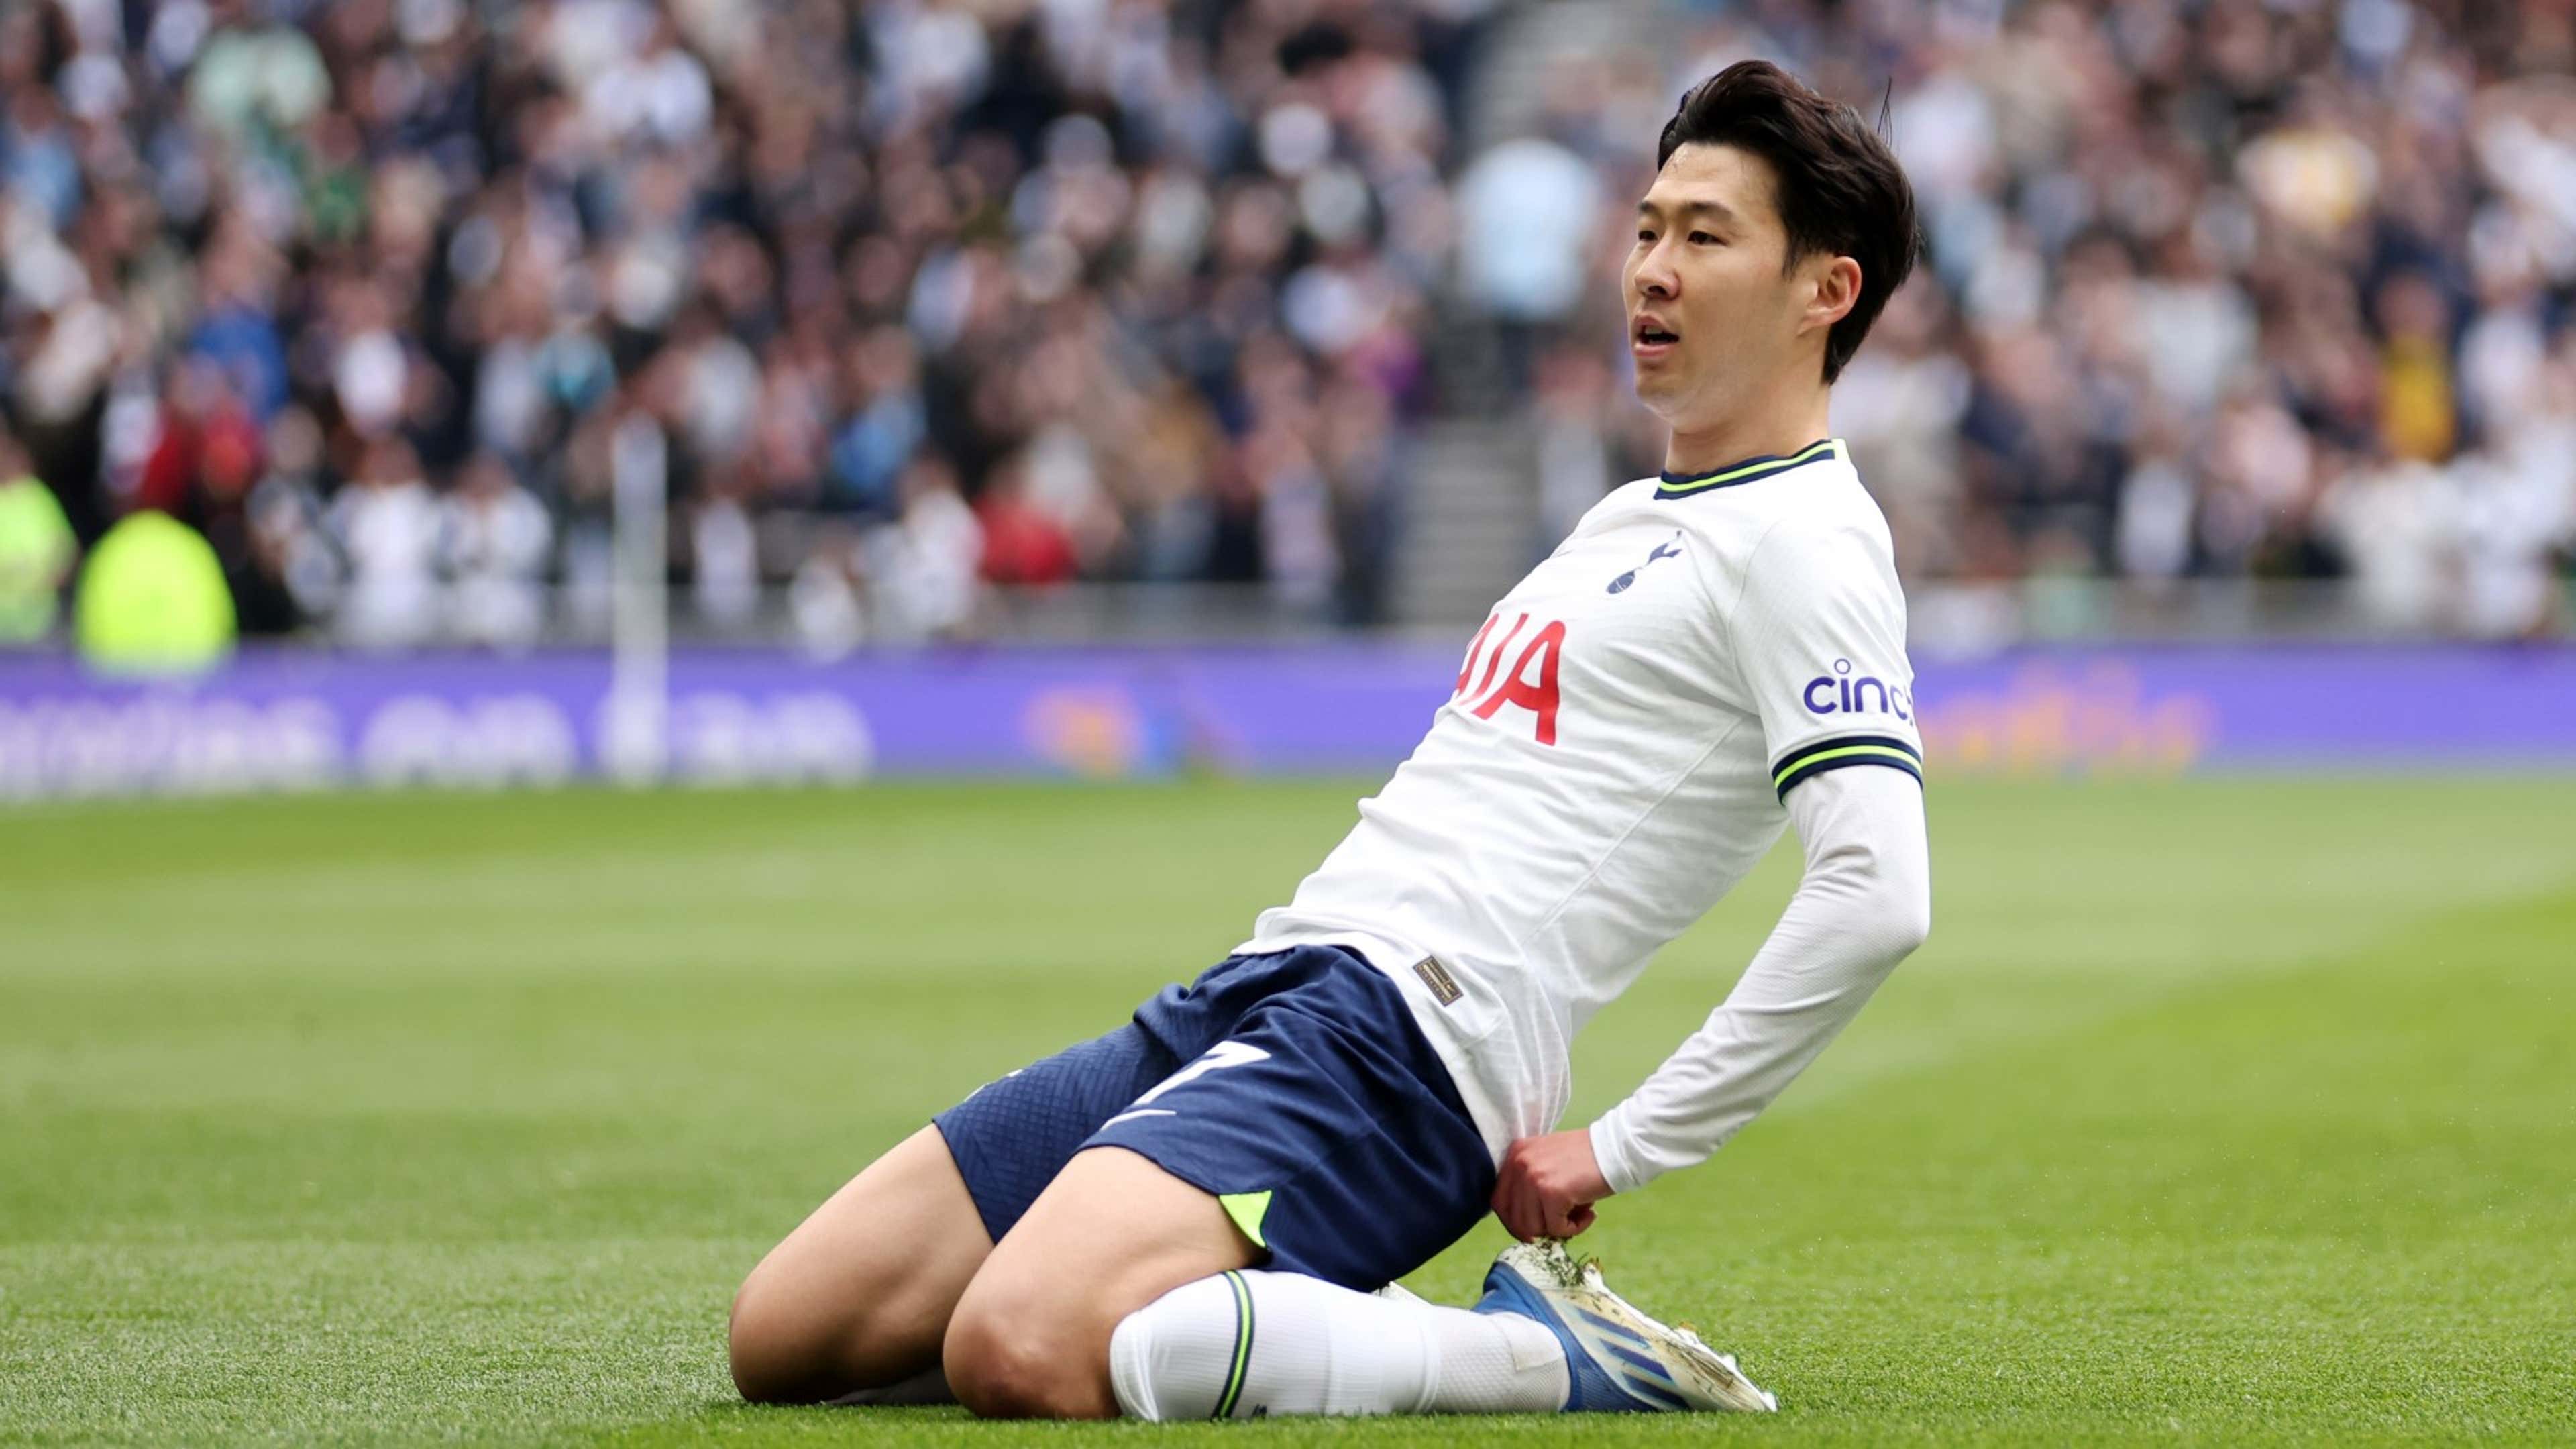 Tottenham's Heung-Min Son wants to play at Asian Games, says South